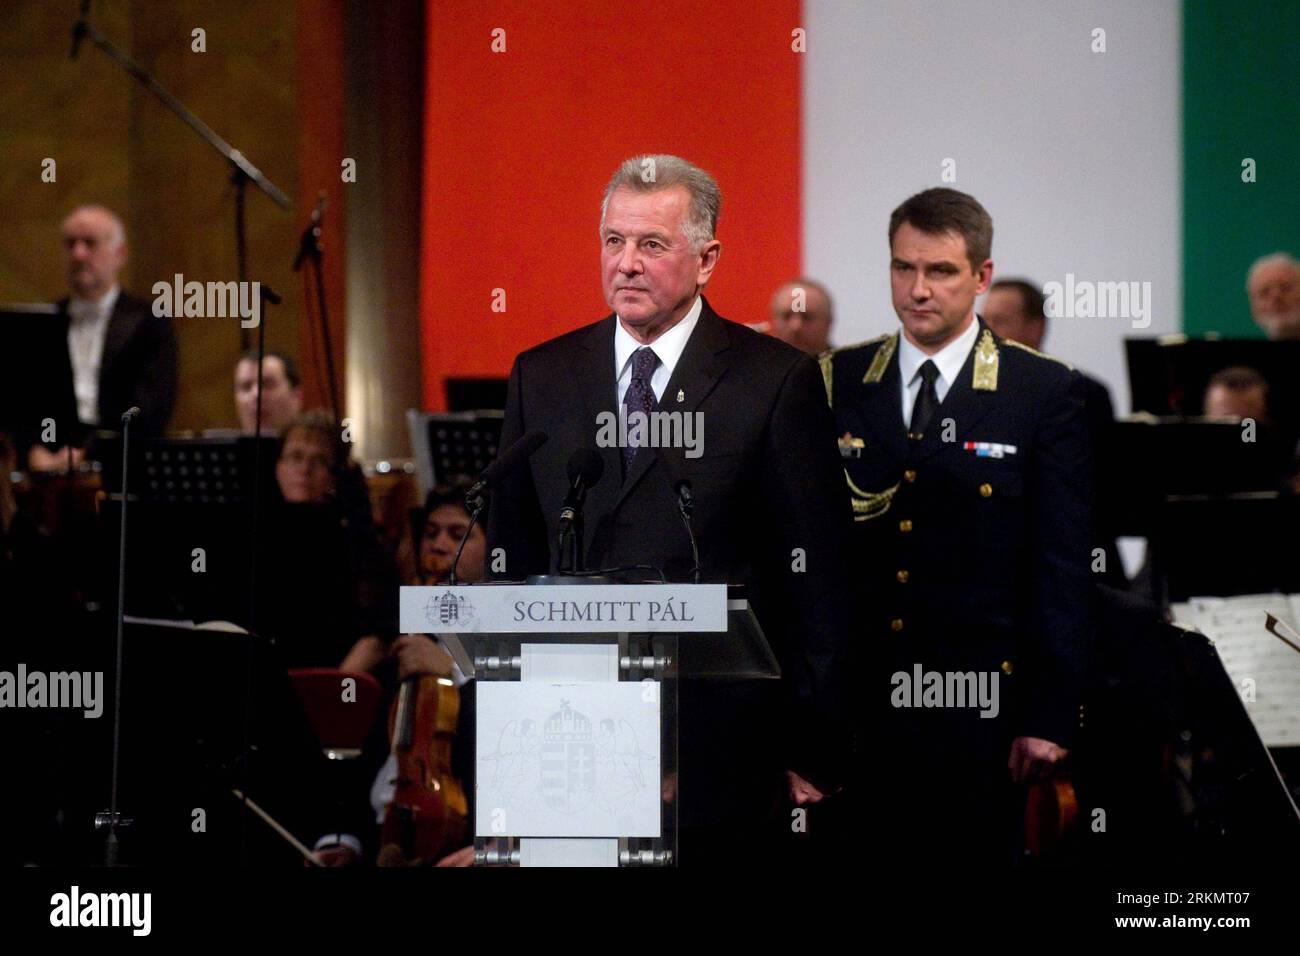 (120103) -- BUDAPEST, Jan. 3, 2012 (Xinhua) -- Hungarian President Pal Schmitt speaks during a gala ceremony in honor of the country s new constitution at the State Opera House in Budapest Jan. 2, 2012. Meanwhile, tens of thousands of people on Monday protested against the new constitution, which came into force on Jan. 1. (Xinhua/Peter Kollanyi) (ctt) HUNGARY-BUDAPEST-NEW CONSTITUTION PUBLICATIONxNOTxINxCHN   120103 Budapest Jan 3 2012 XINHUA Hungarian President Pal Schmitt Speaks during a Gala Ceremony in HONOR of The Country S New Constitution AT The State Opera House in Budapest Jan 2 2012 Stock Photo